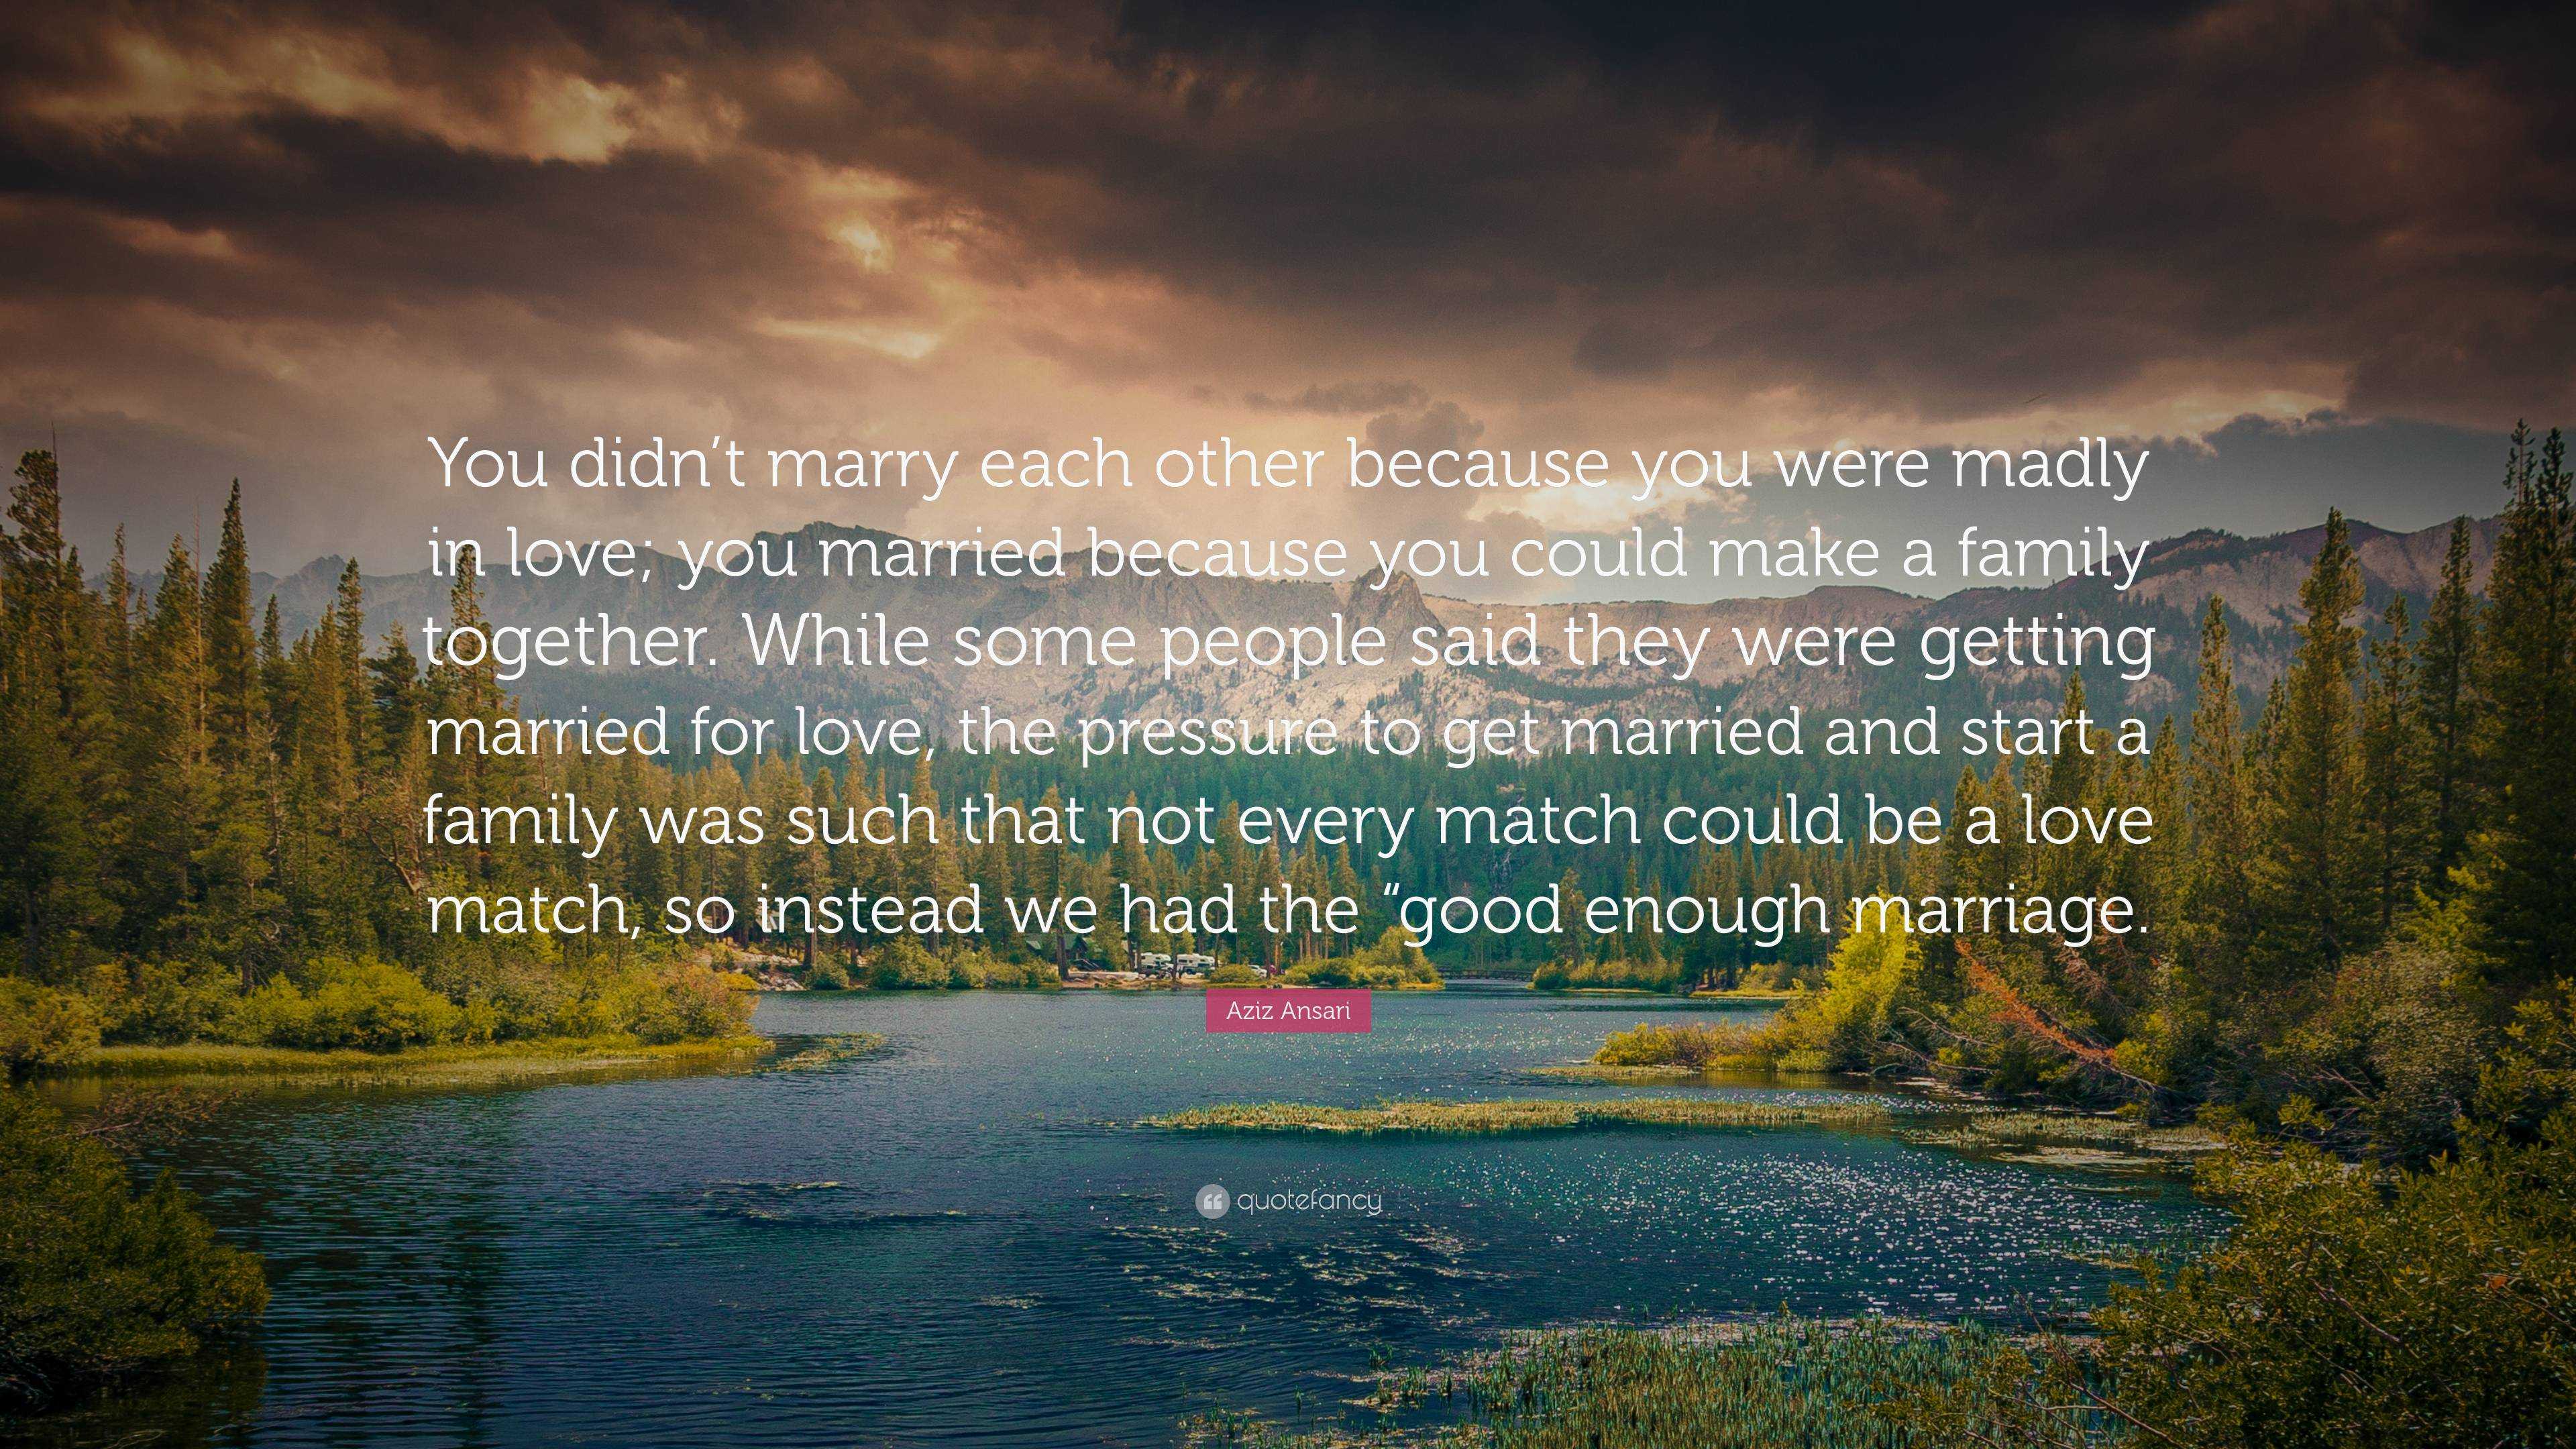 Aziz Ansari Quote: “You Didn't Marry Each Other Because You Were Madly In Love; You Married Because You Could Make A Family Together. While ...”